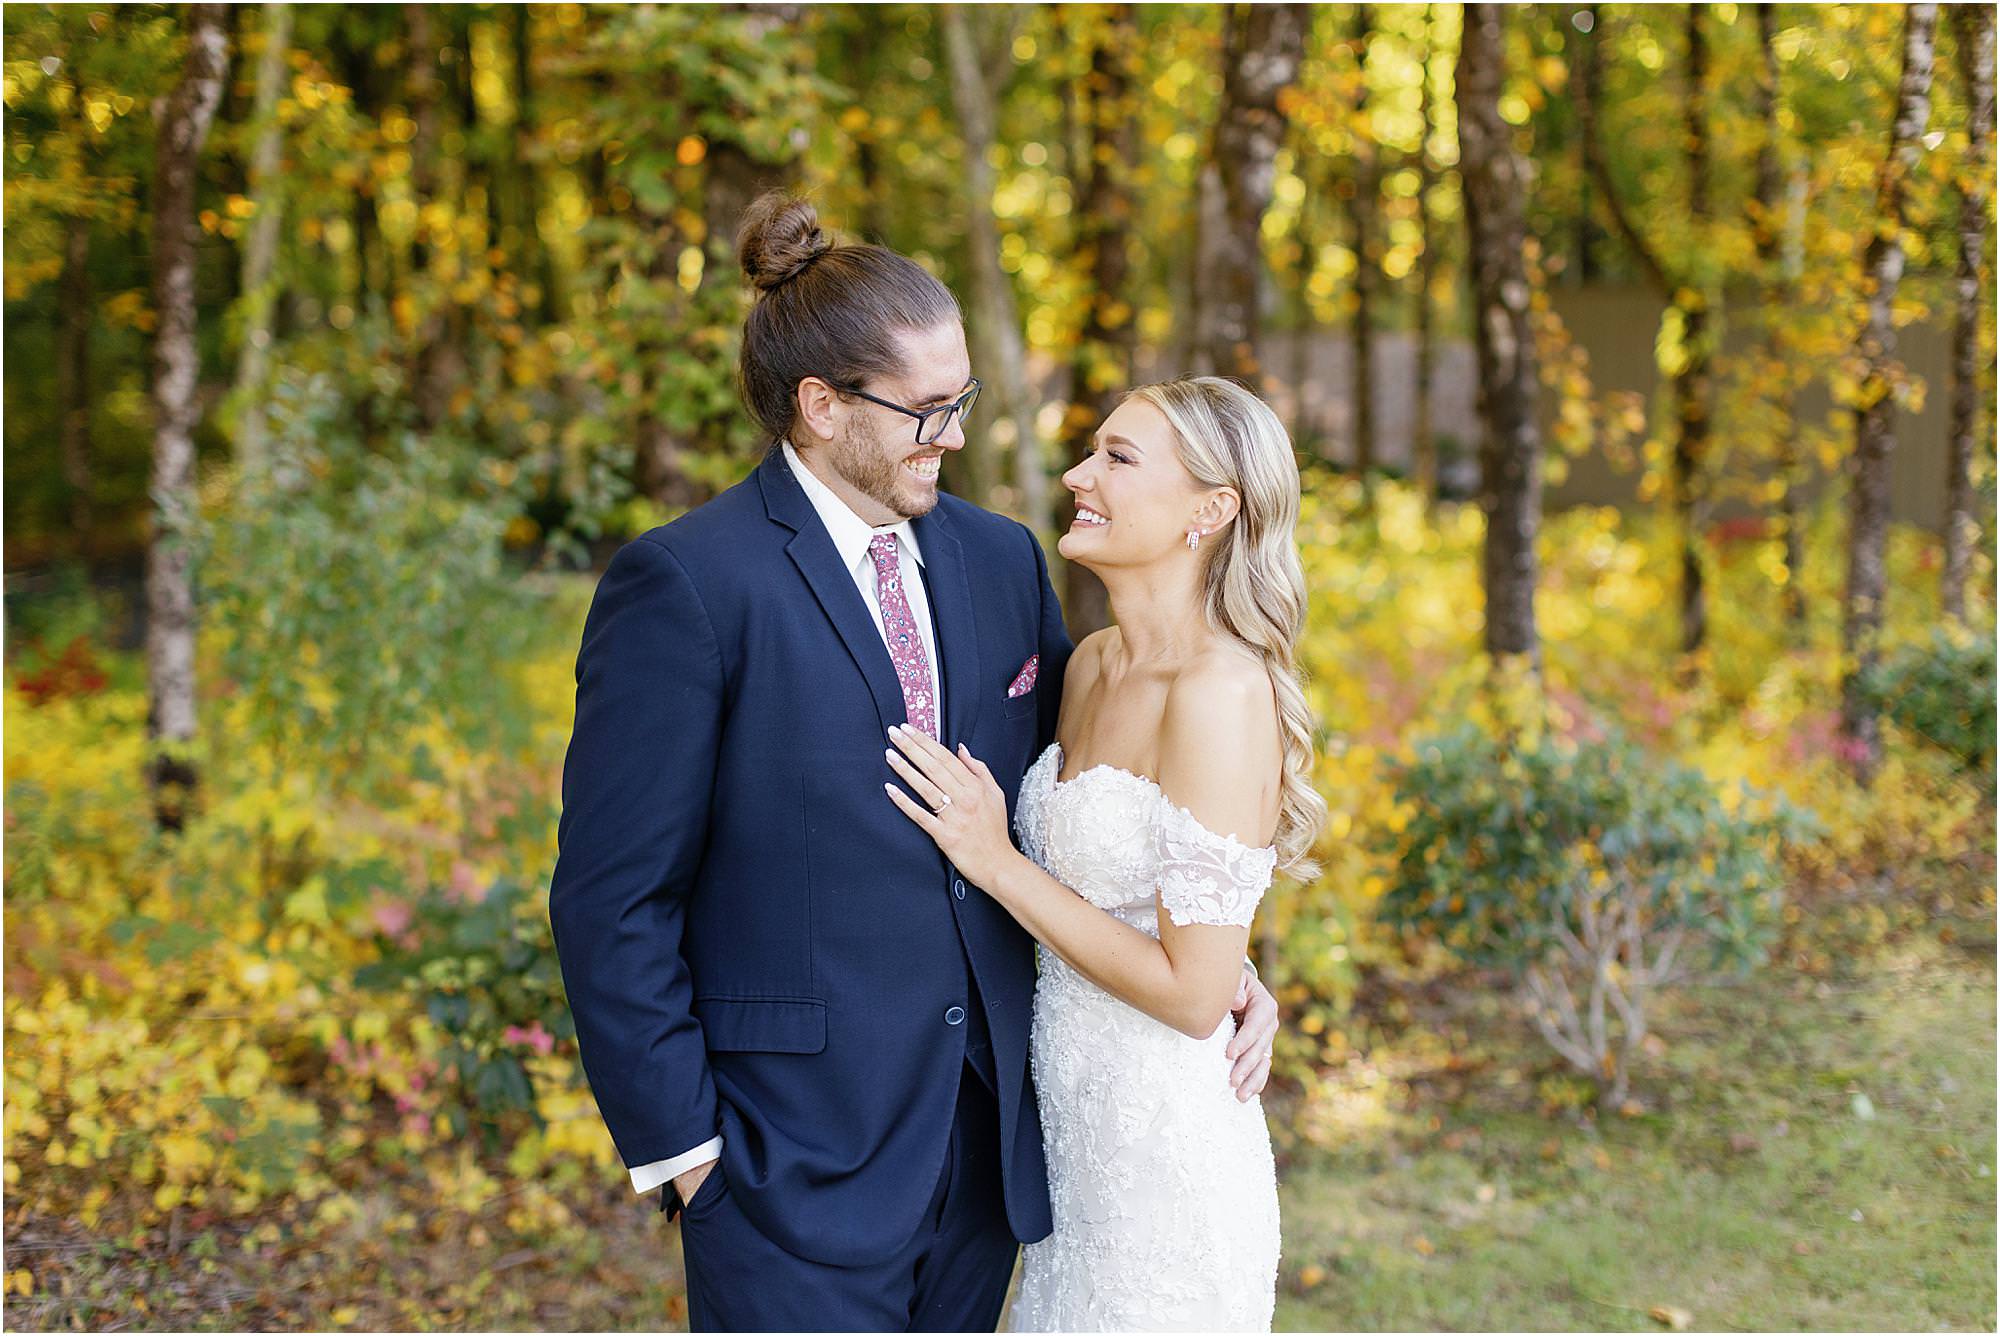 Bride and groom looking at each other during their first look portraits at Stonehurst at Hampton Valley